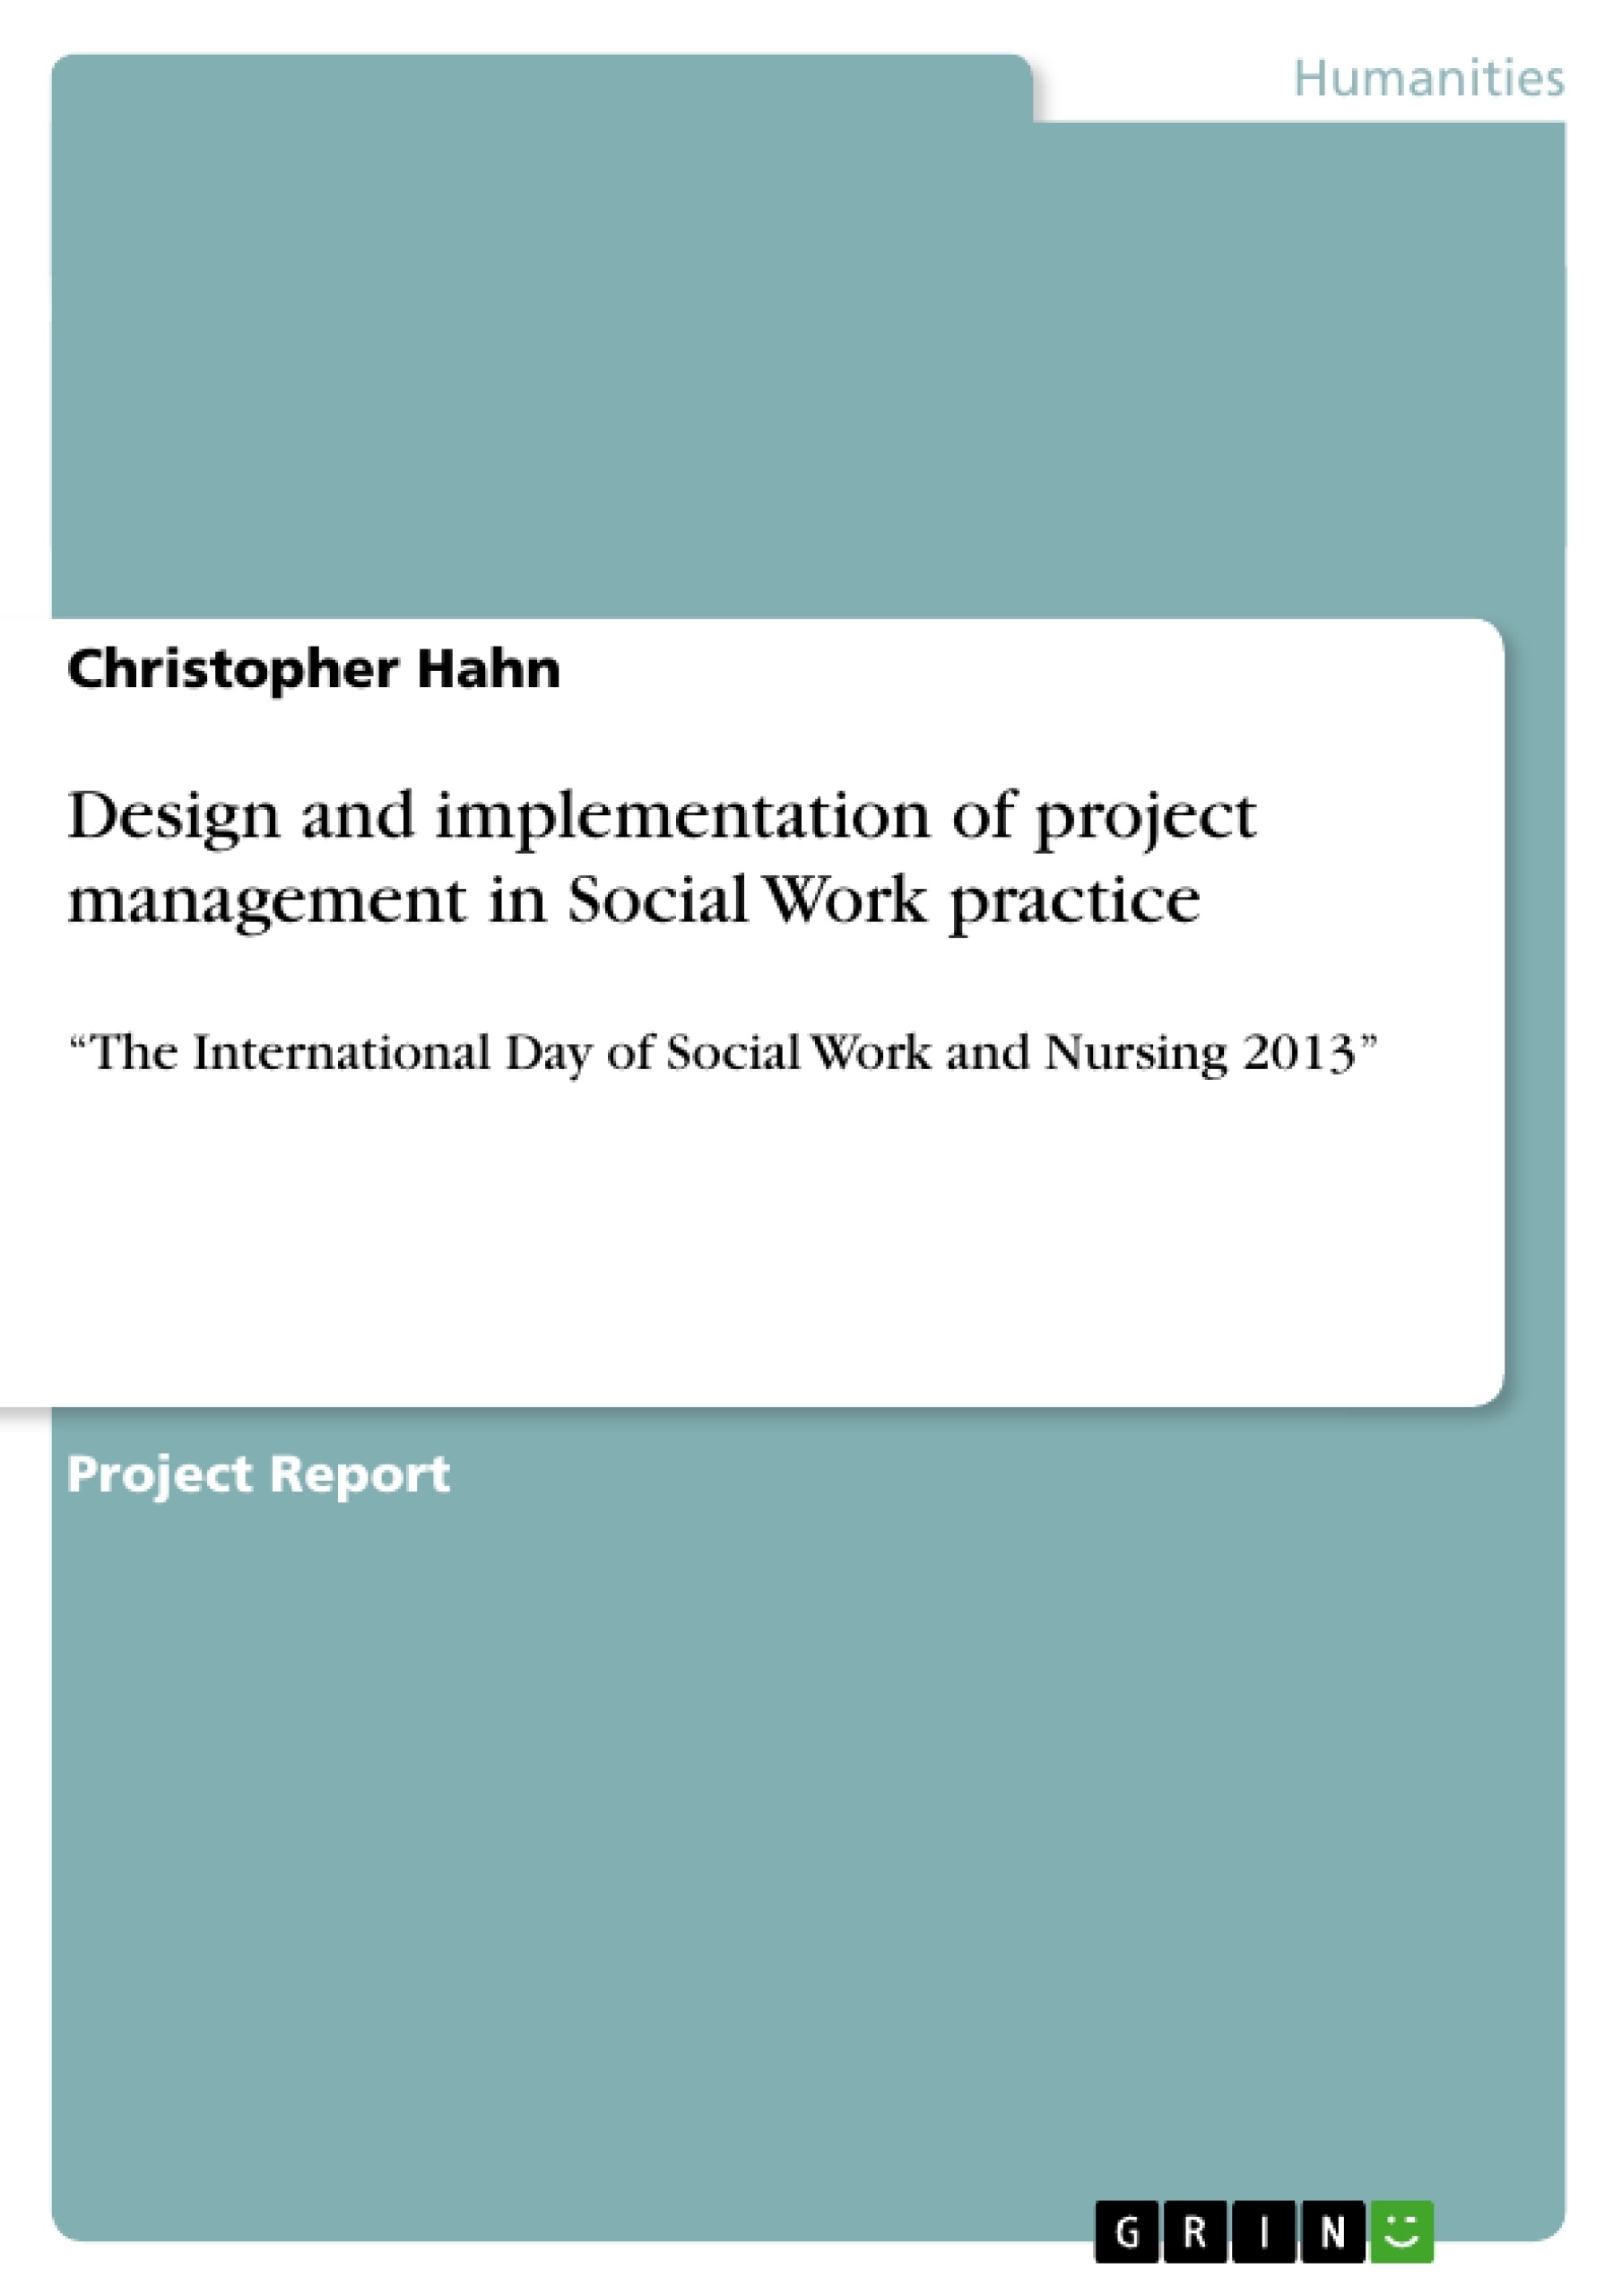 Title: Design and implementation of project management in Social Work practice